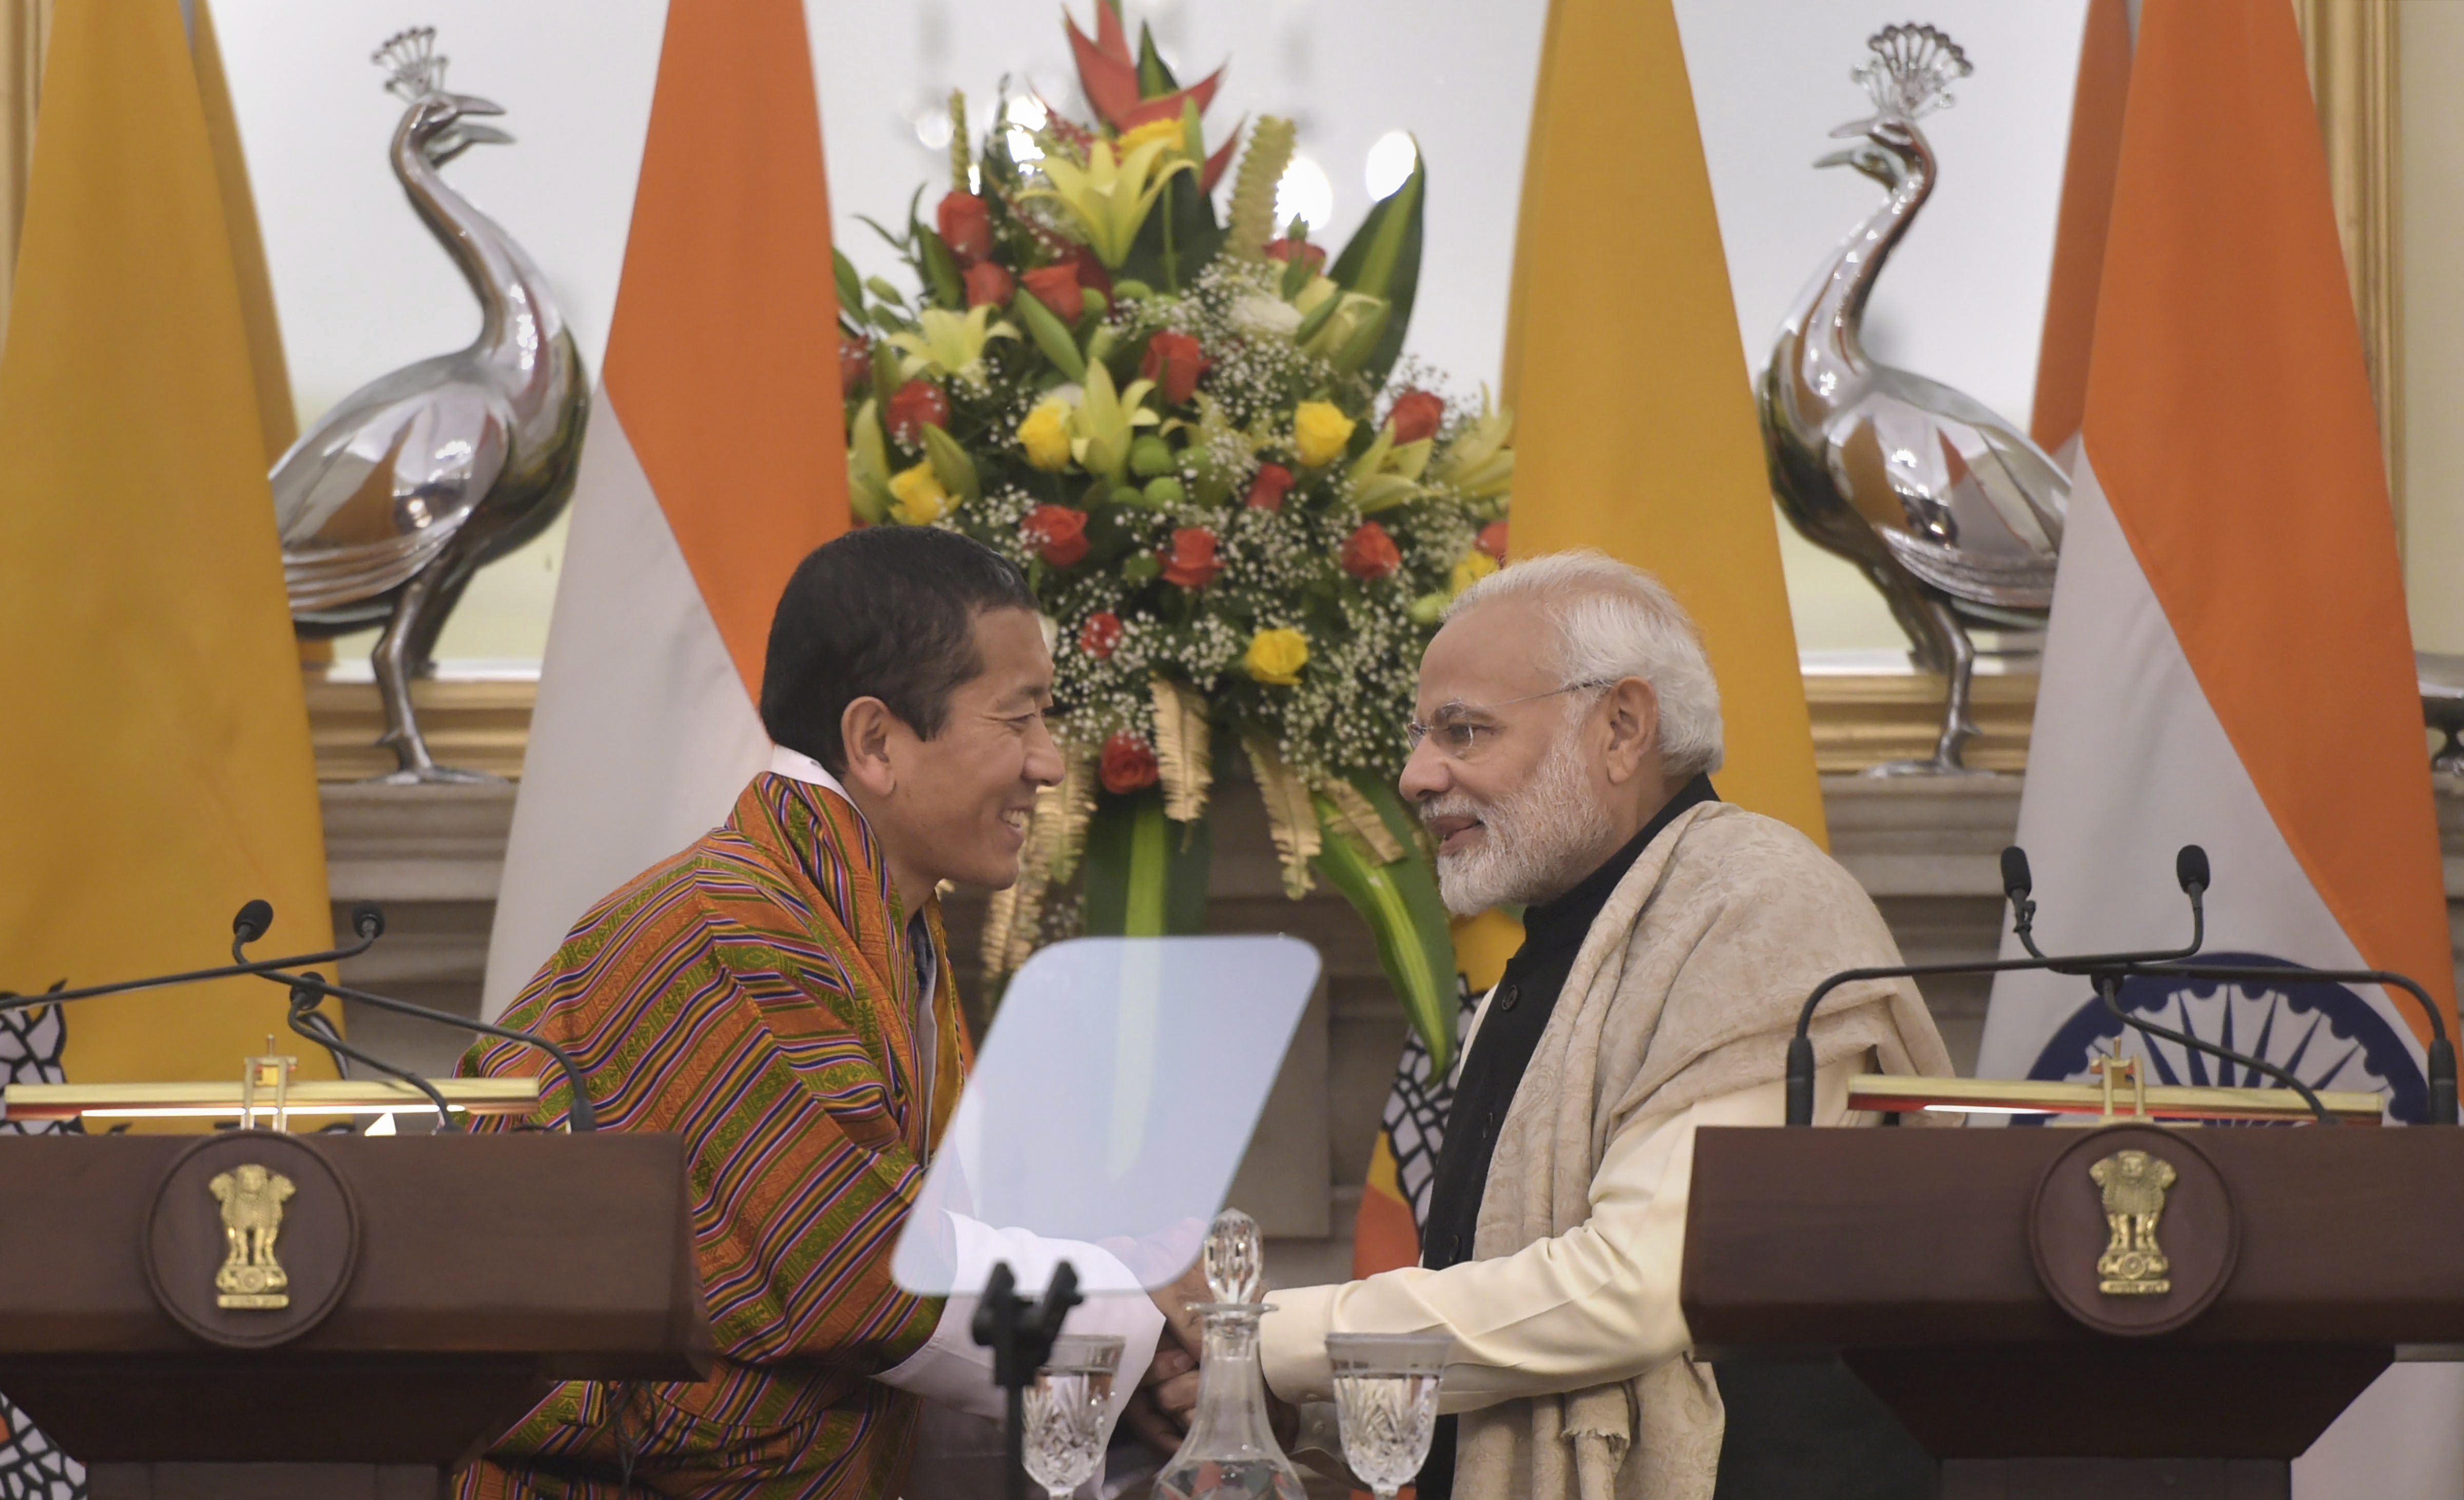 Prime Minister Narendra Modi shakes hands with his Bhutanese counterpart Lotay Tshering after a joint statement at Hyderabad House, in New Delhi - PTI